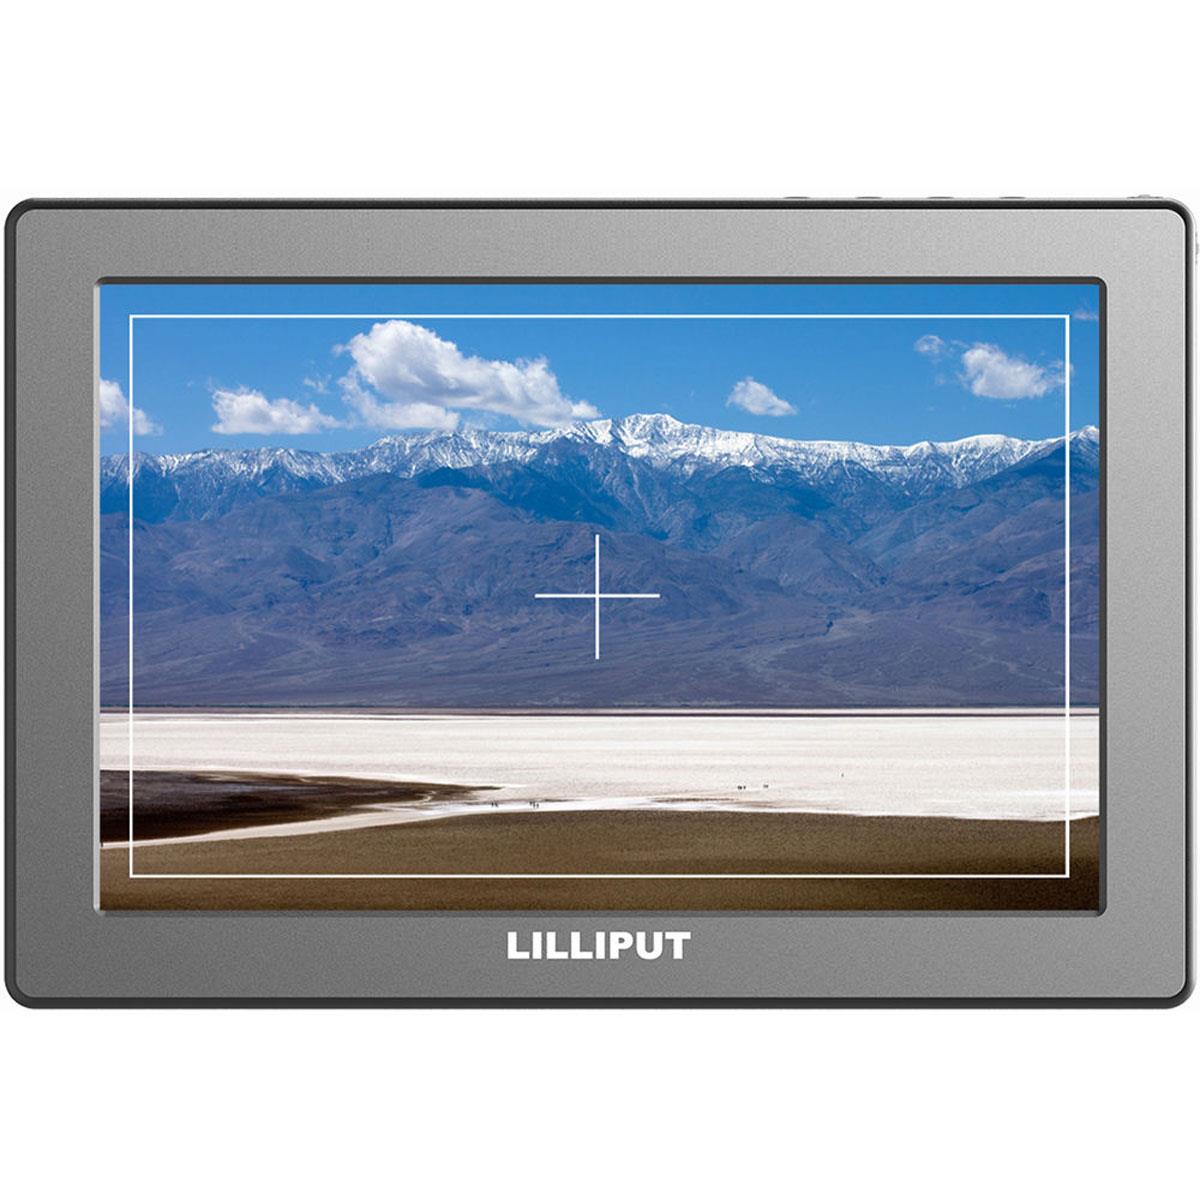 Photos - Camcorder Accessory Lilliput A7 7" Full HD Camera-Top LED Monitor 